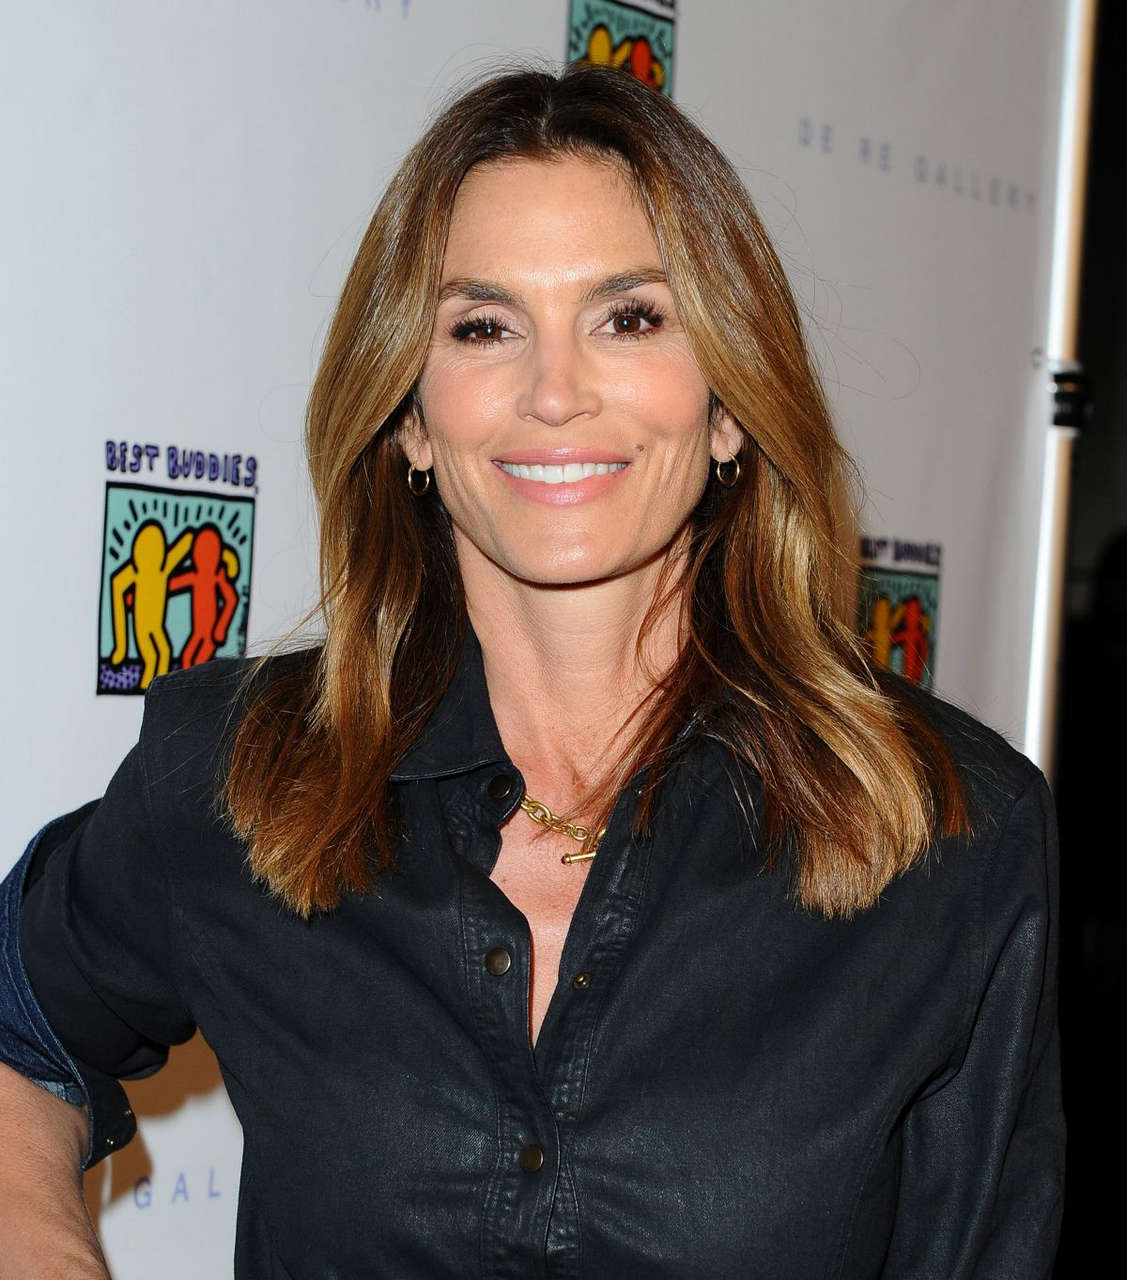 Cindy Crawford Art Of Friendship Benefit Photoauction West Hollywood